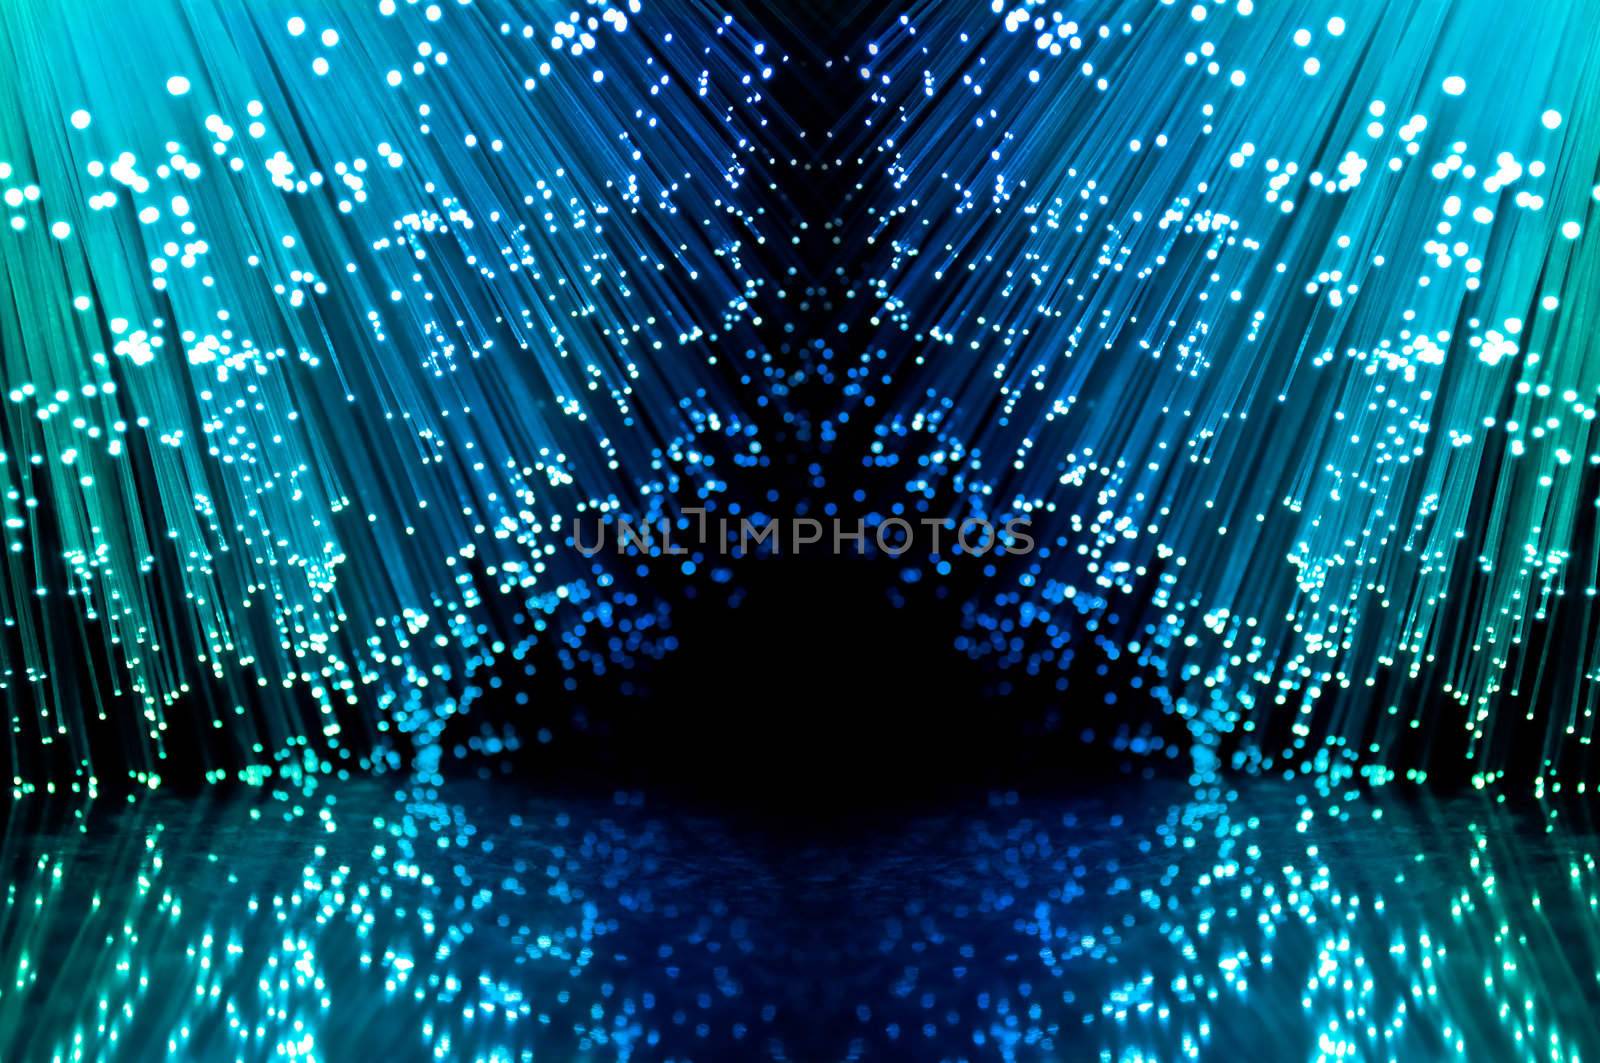 Close up on two groups of illuminated blue fiber optic light strands against a black background and reflecting into the foreground.